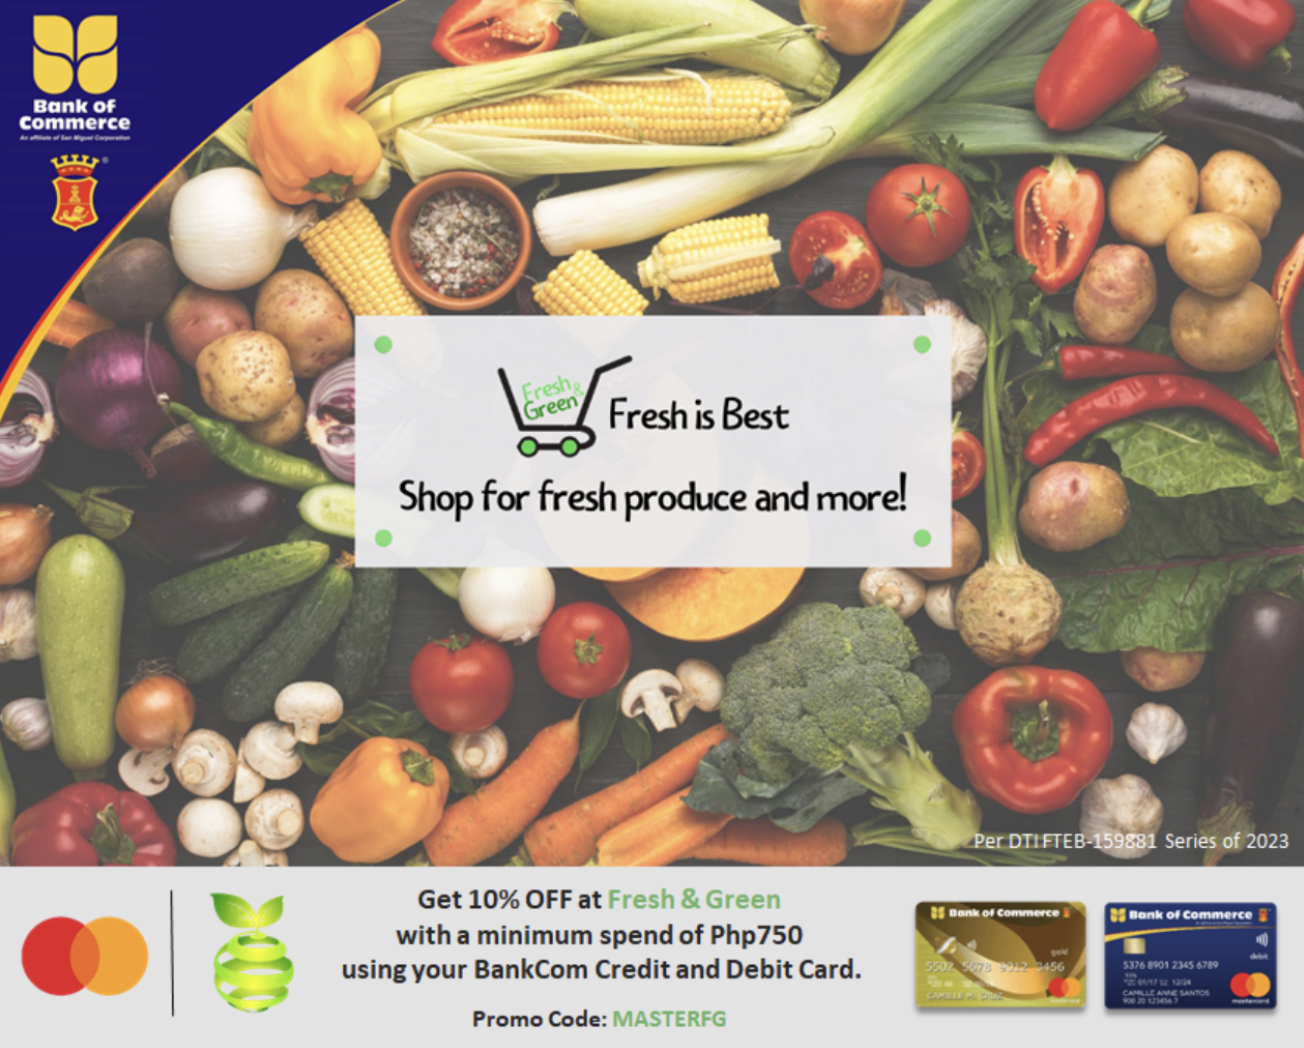 bank of commerce credit card promo 2023 - fresh and green